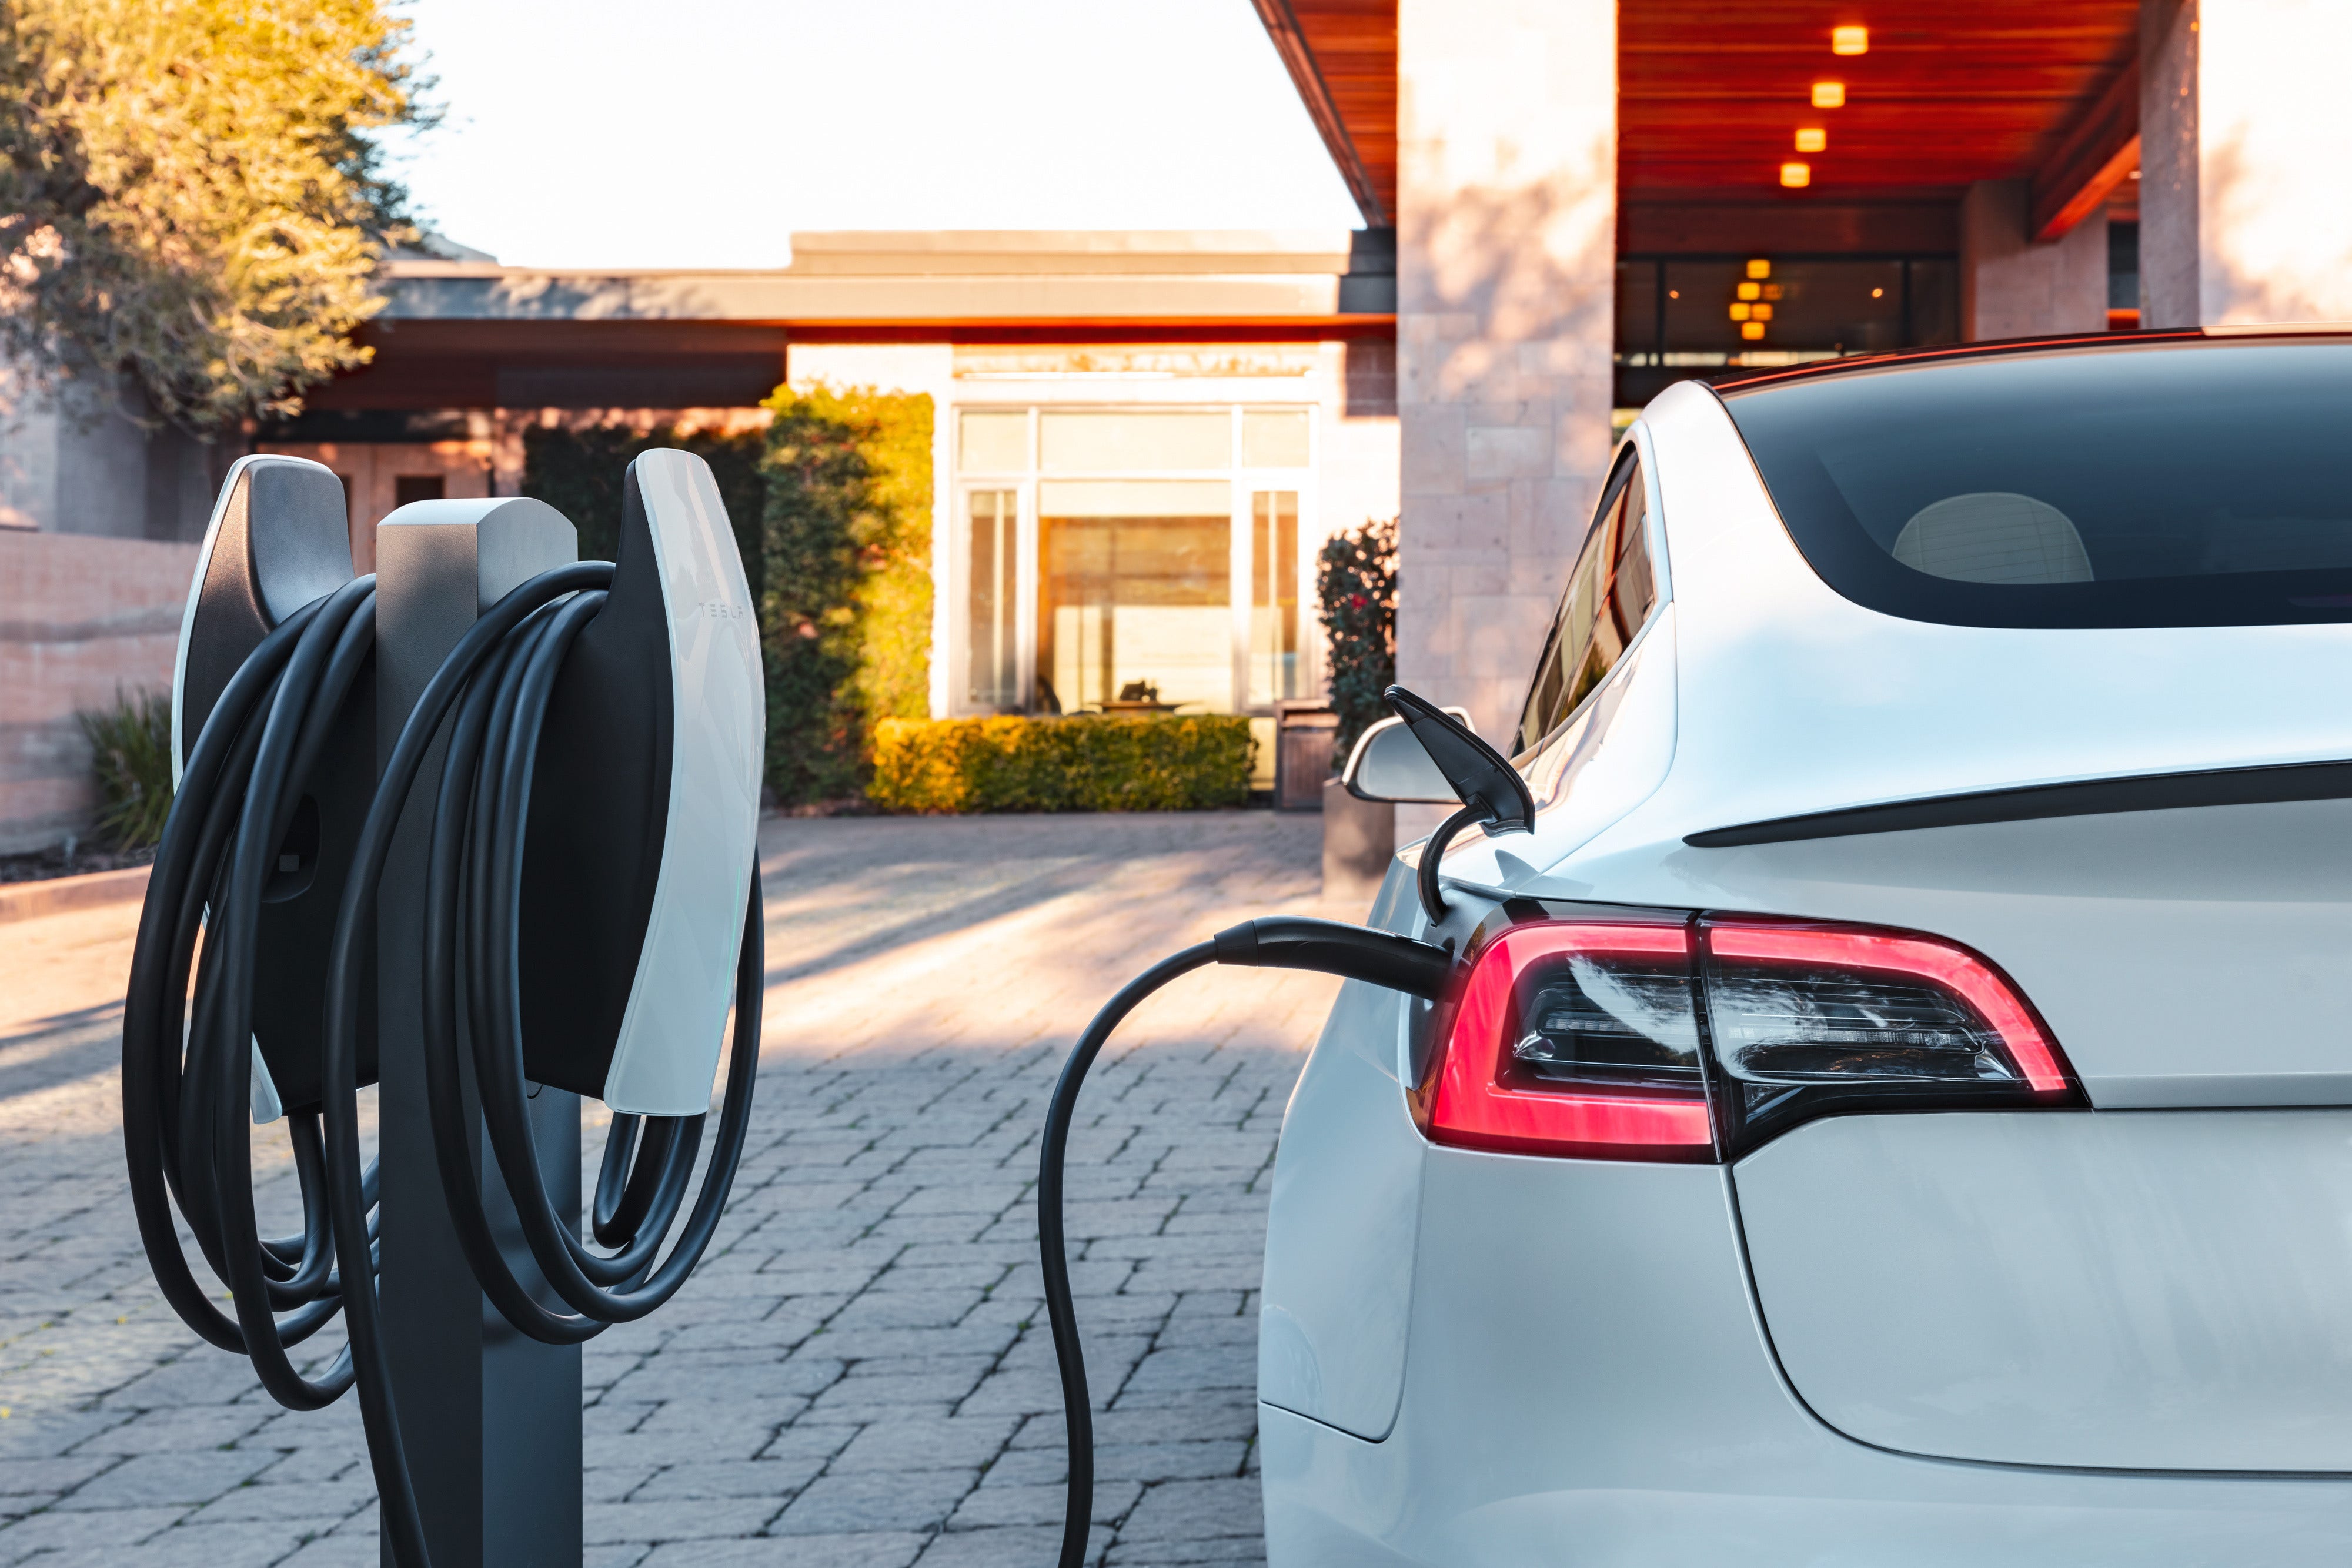 Electric Vehicle Stocks Are Trending Lower: What's Going On?